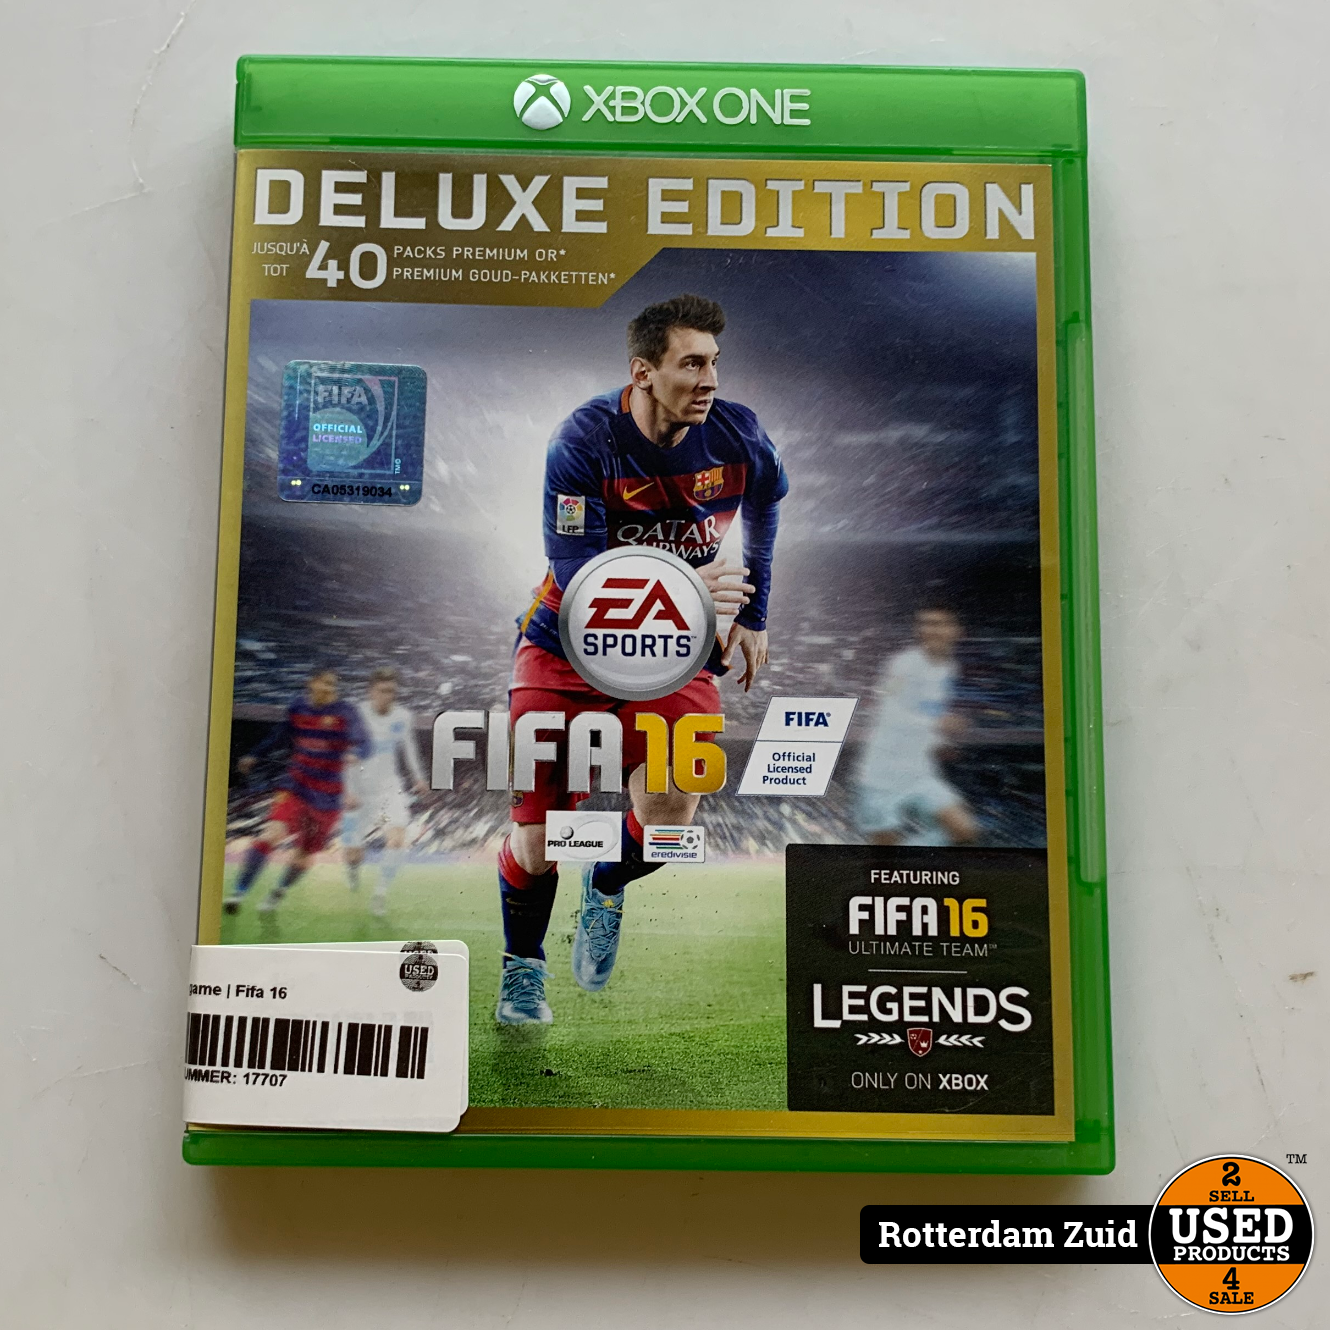 Dicteren auditorium Deuk Xbox One game | Fifa 16 - Used Products Rotterdam Zuid